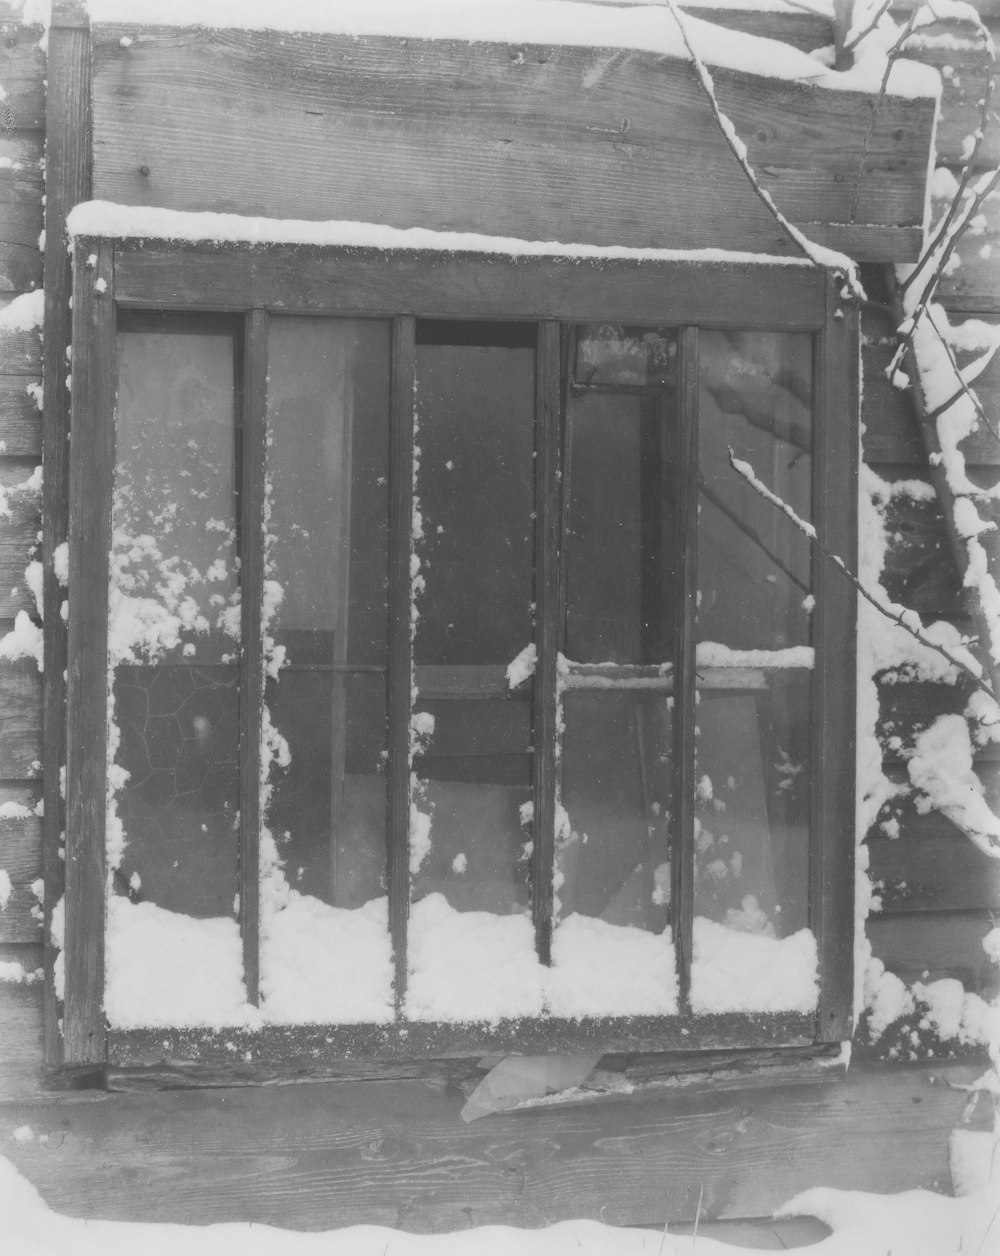 a black and white photo of a window in the snow